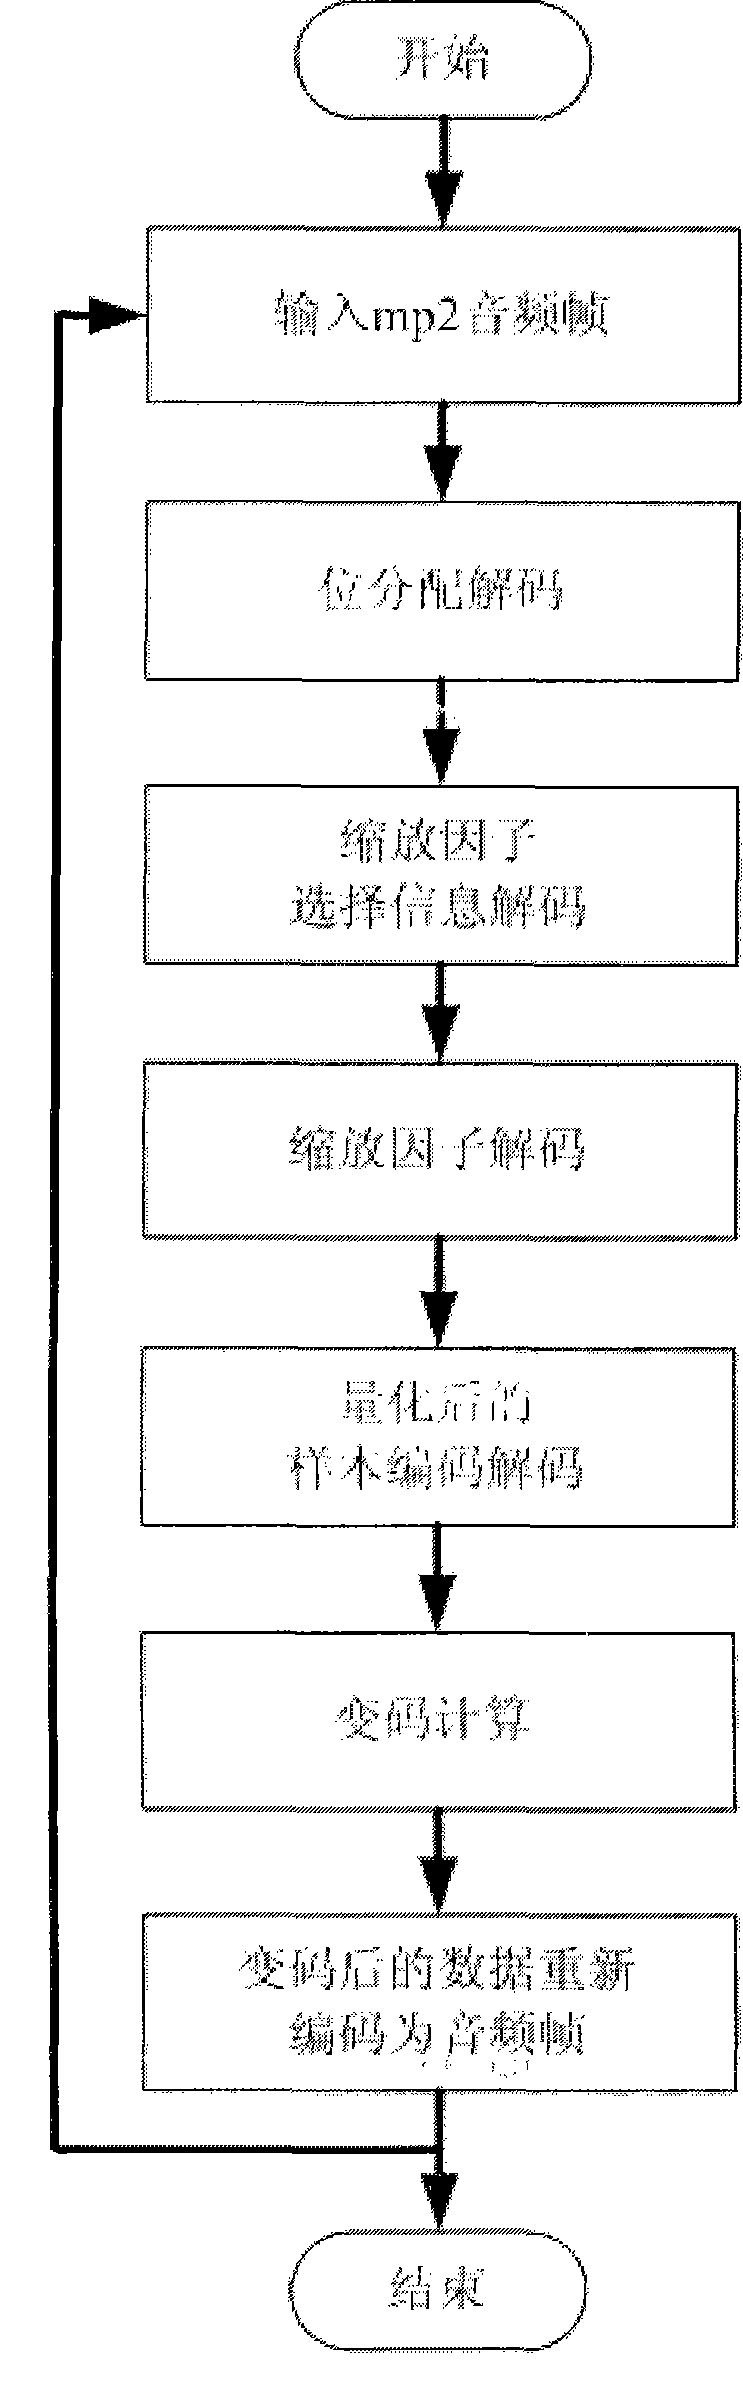 Method for fast code changing in large range to audio information to break virus